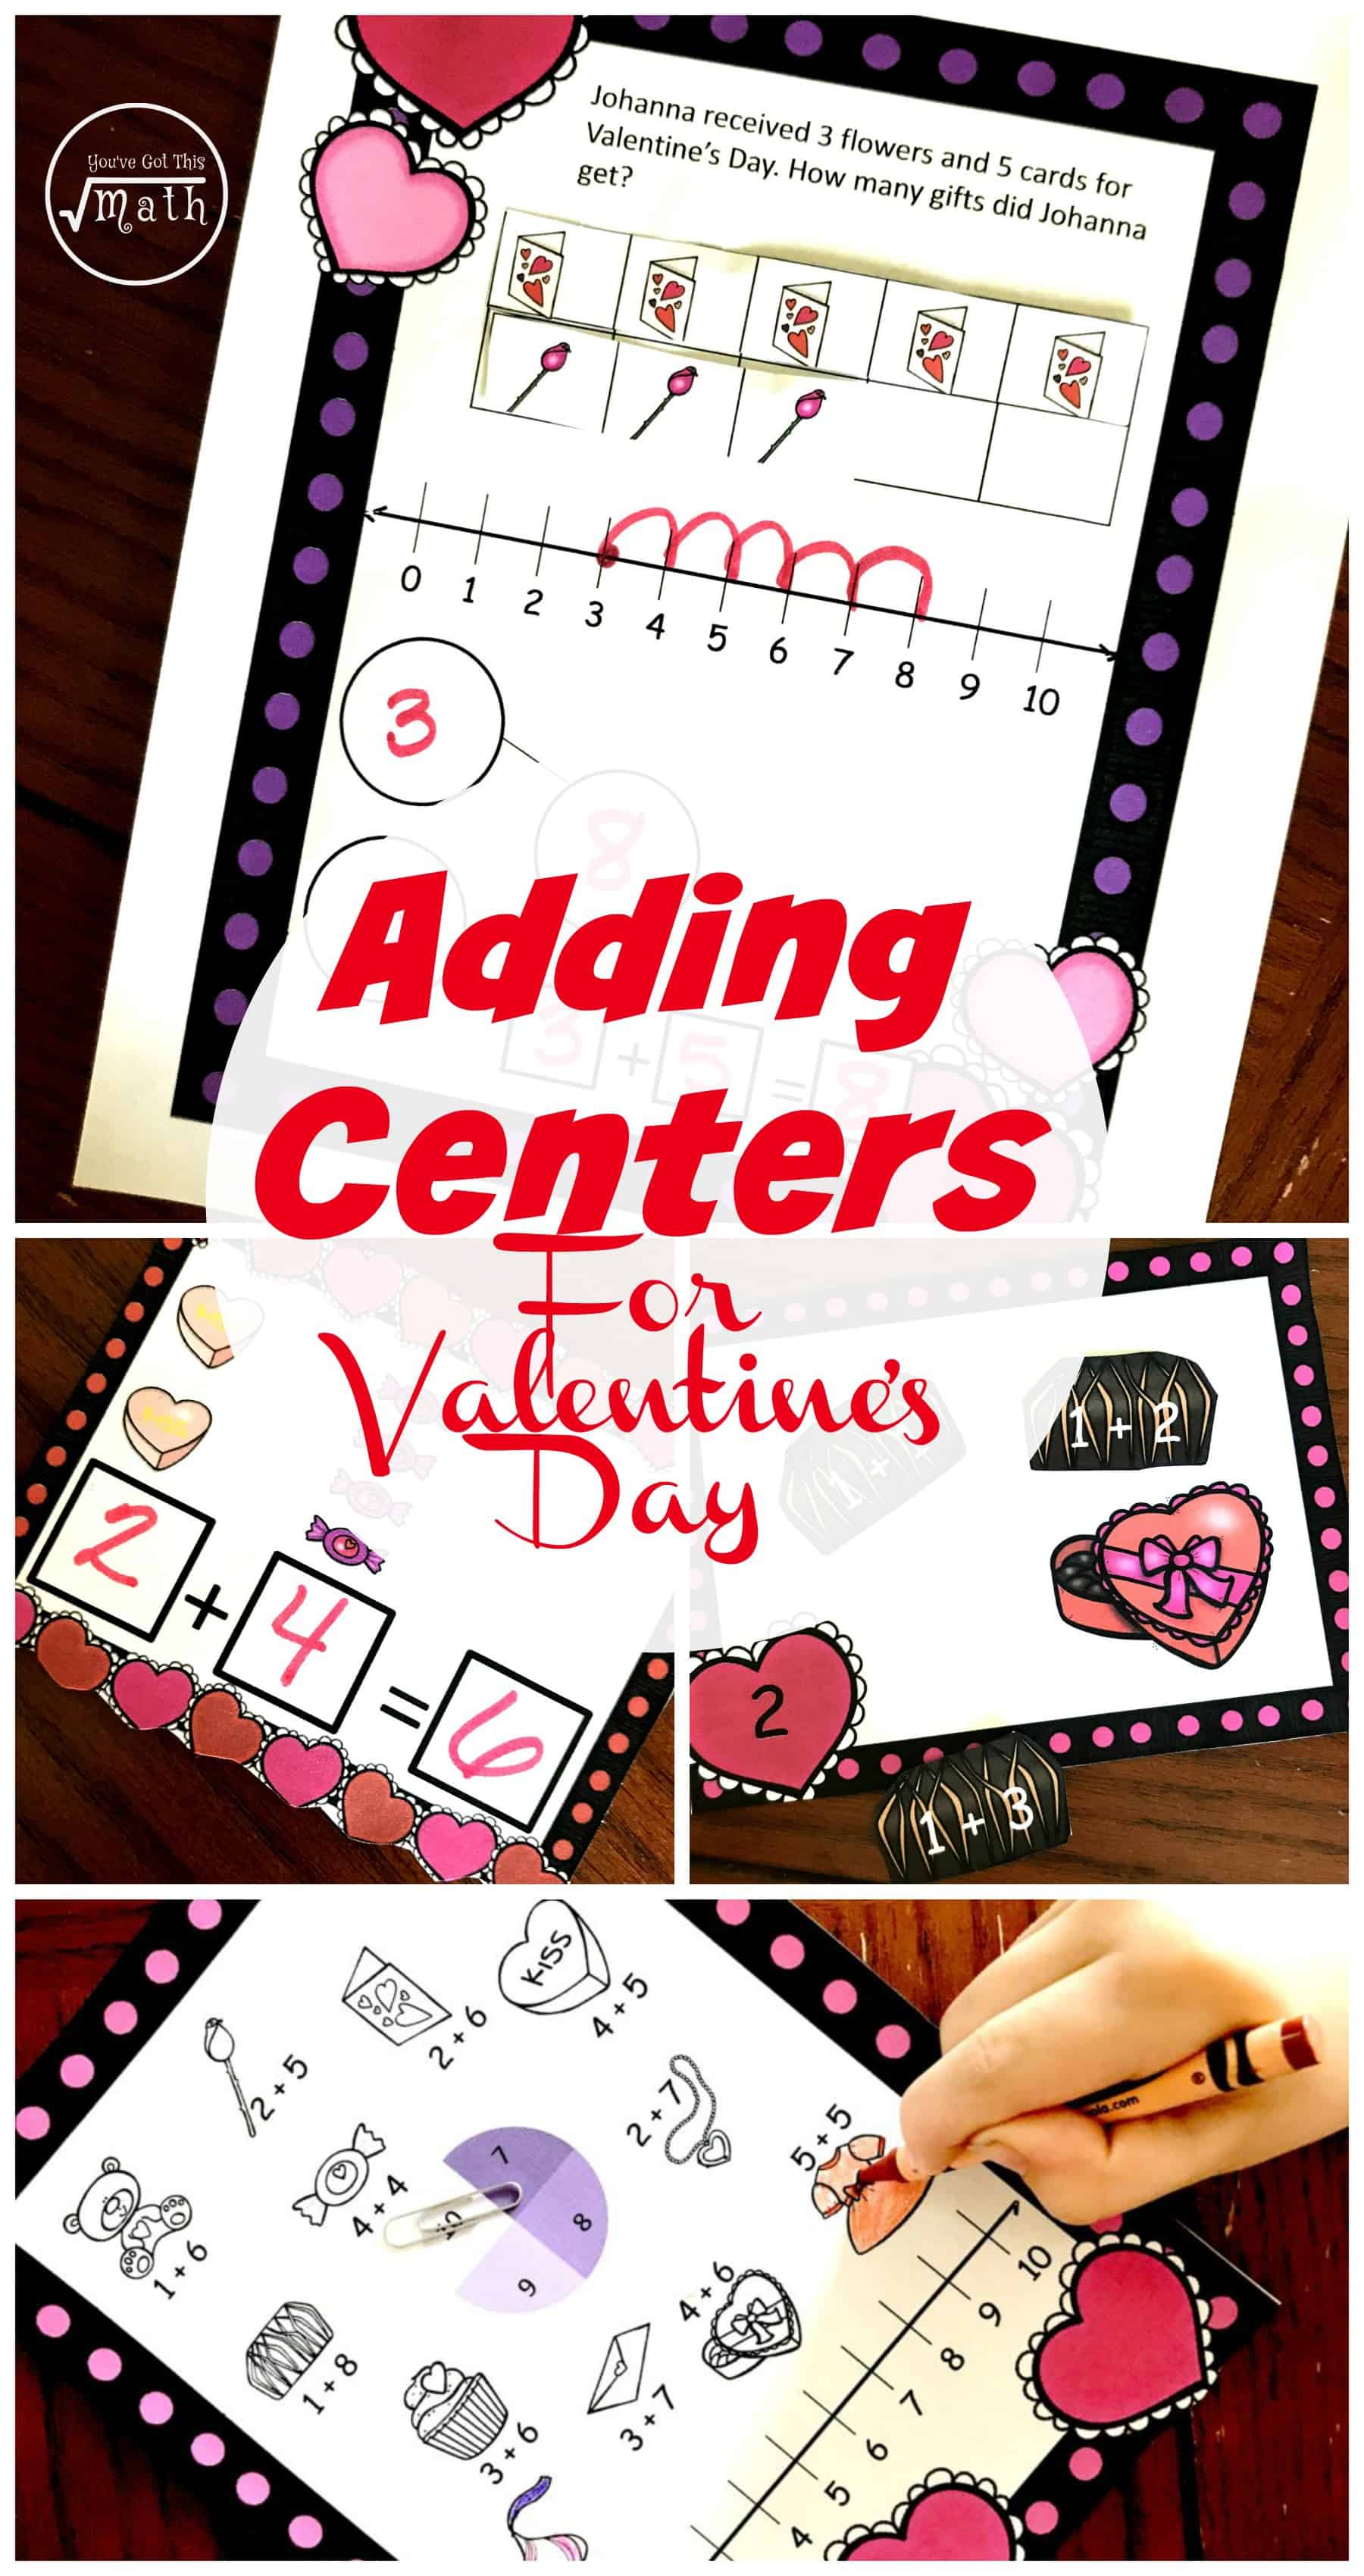 Adding within 10 is an important skill littles need to master. These addition activities for kindergarten w/ Valentine Theme are perfect for extra practice.